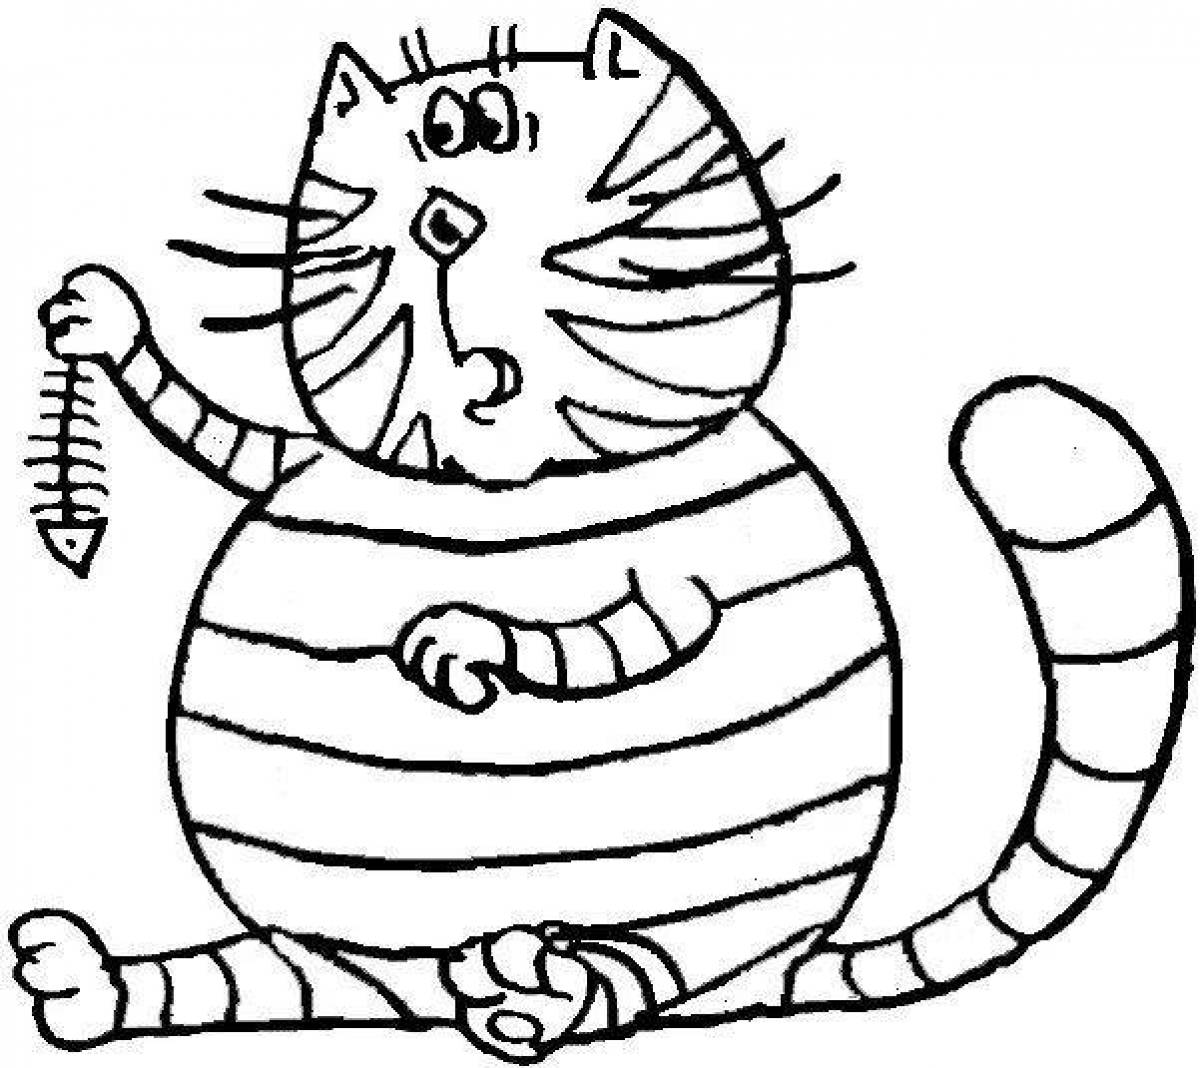 Coloring page plump fat cat